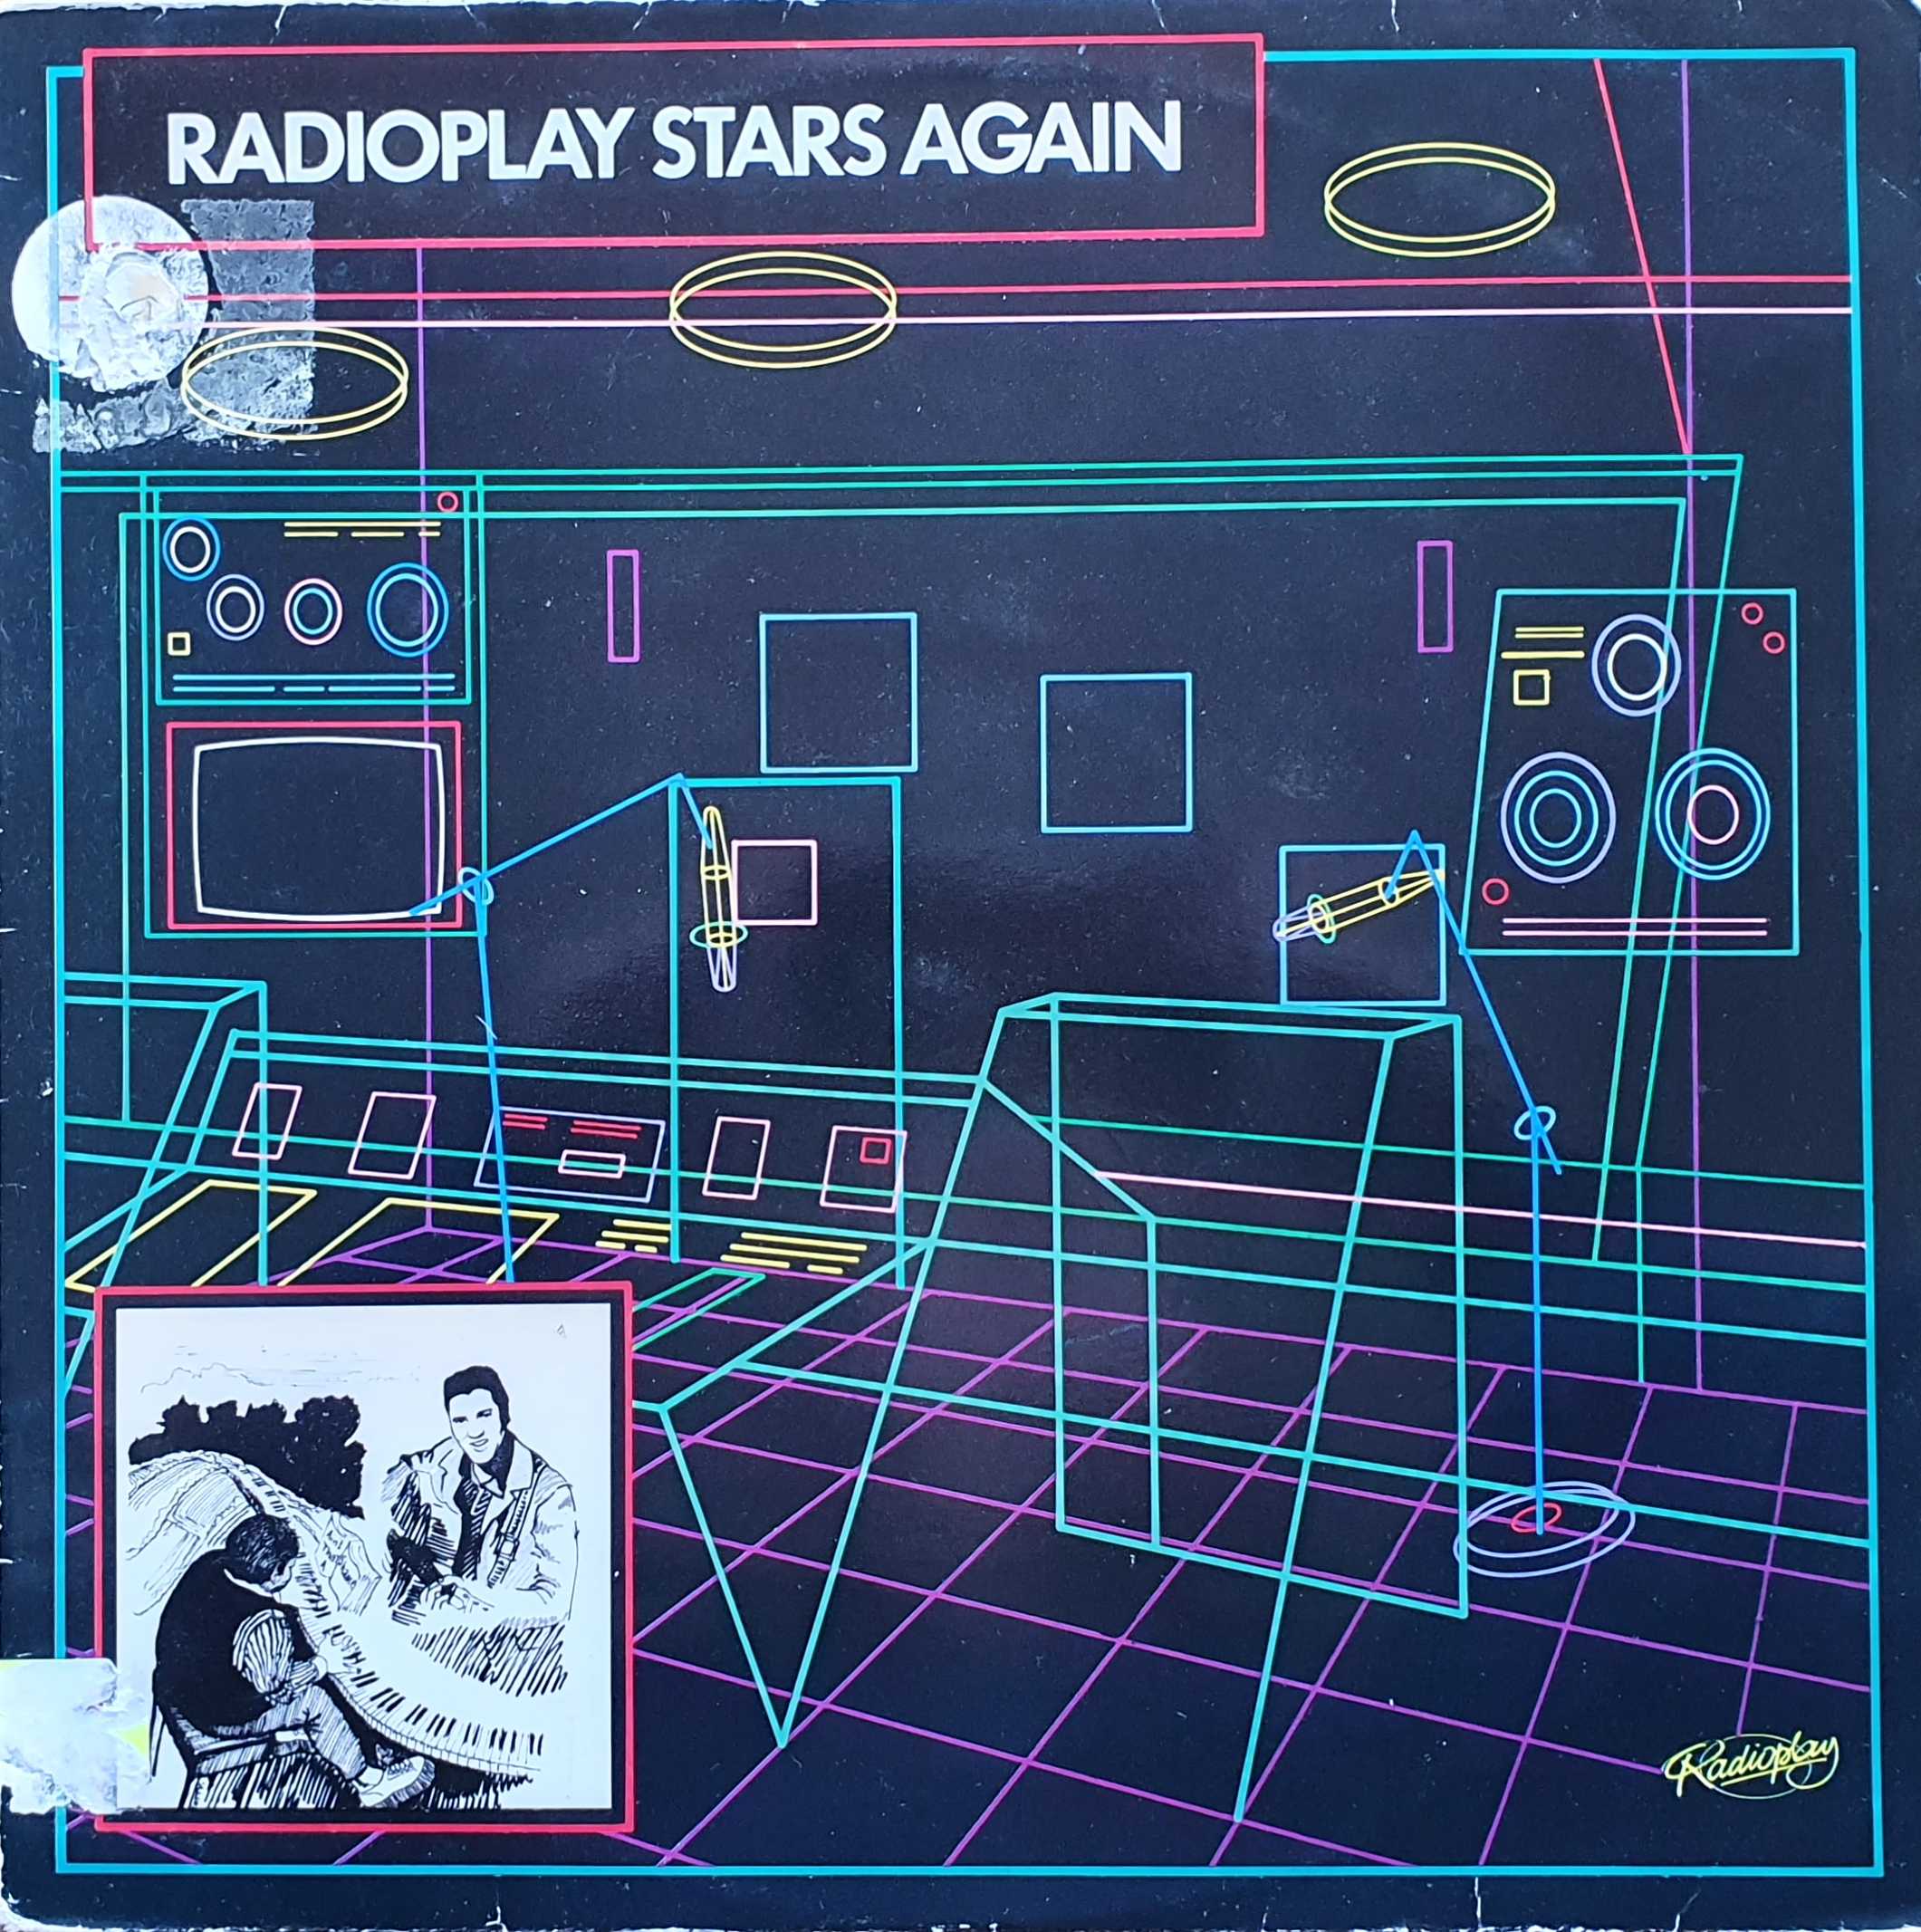 Picture of TAIR 87018 Radioplay stars again by artist Various from the BBC albums - Records and Tapes library